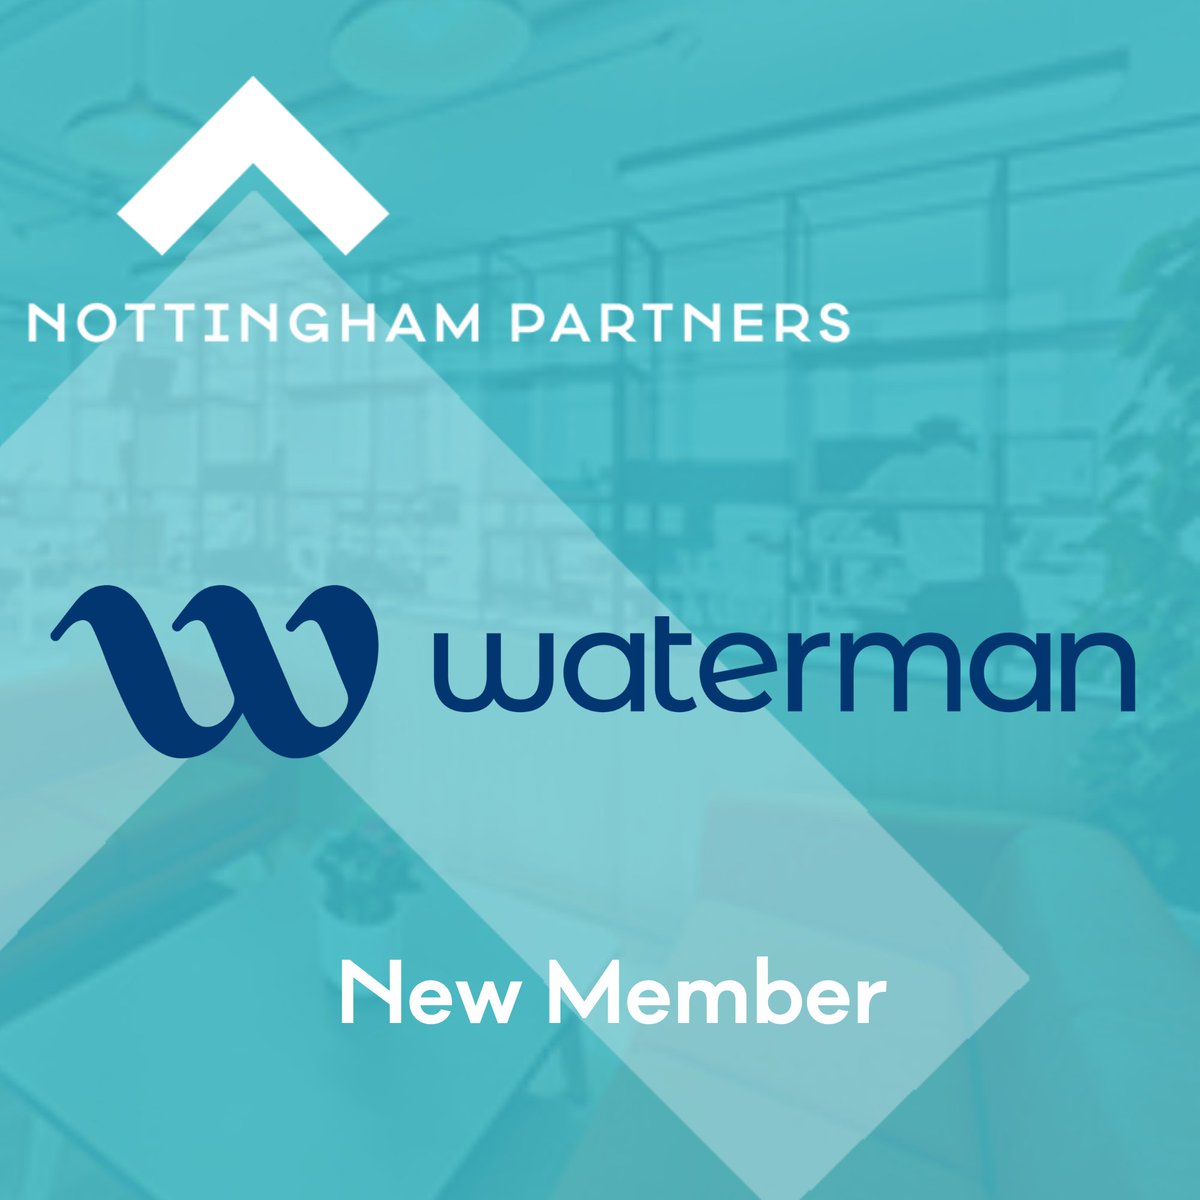 Welcome to @Waterman_group, our latest Nottingham Partners member! A consultancy providing sustainable solutions to meet the planning, engineering design and project delivery needs of the property, infrastructure, environment and energy markets. ow.ly/xPk150QvRwv